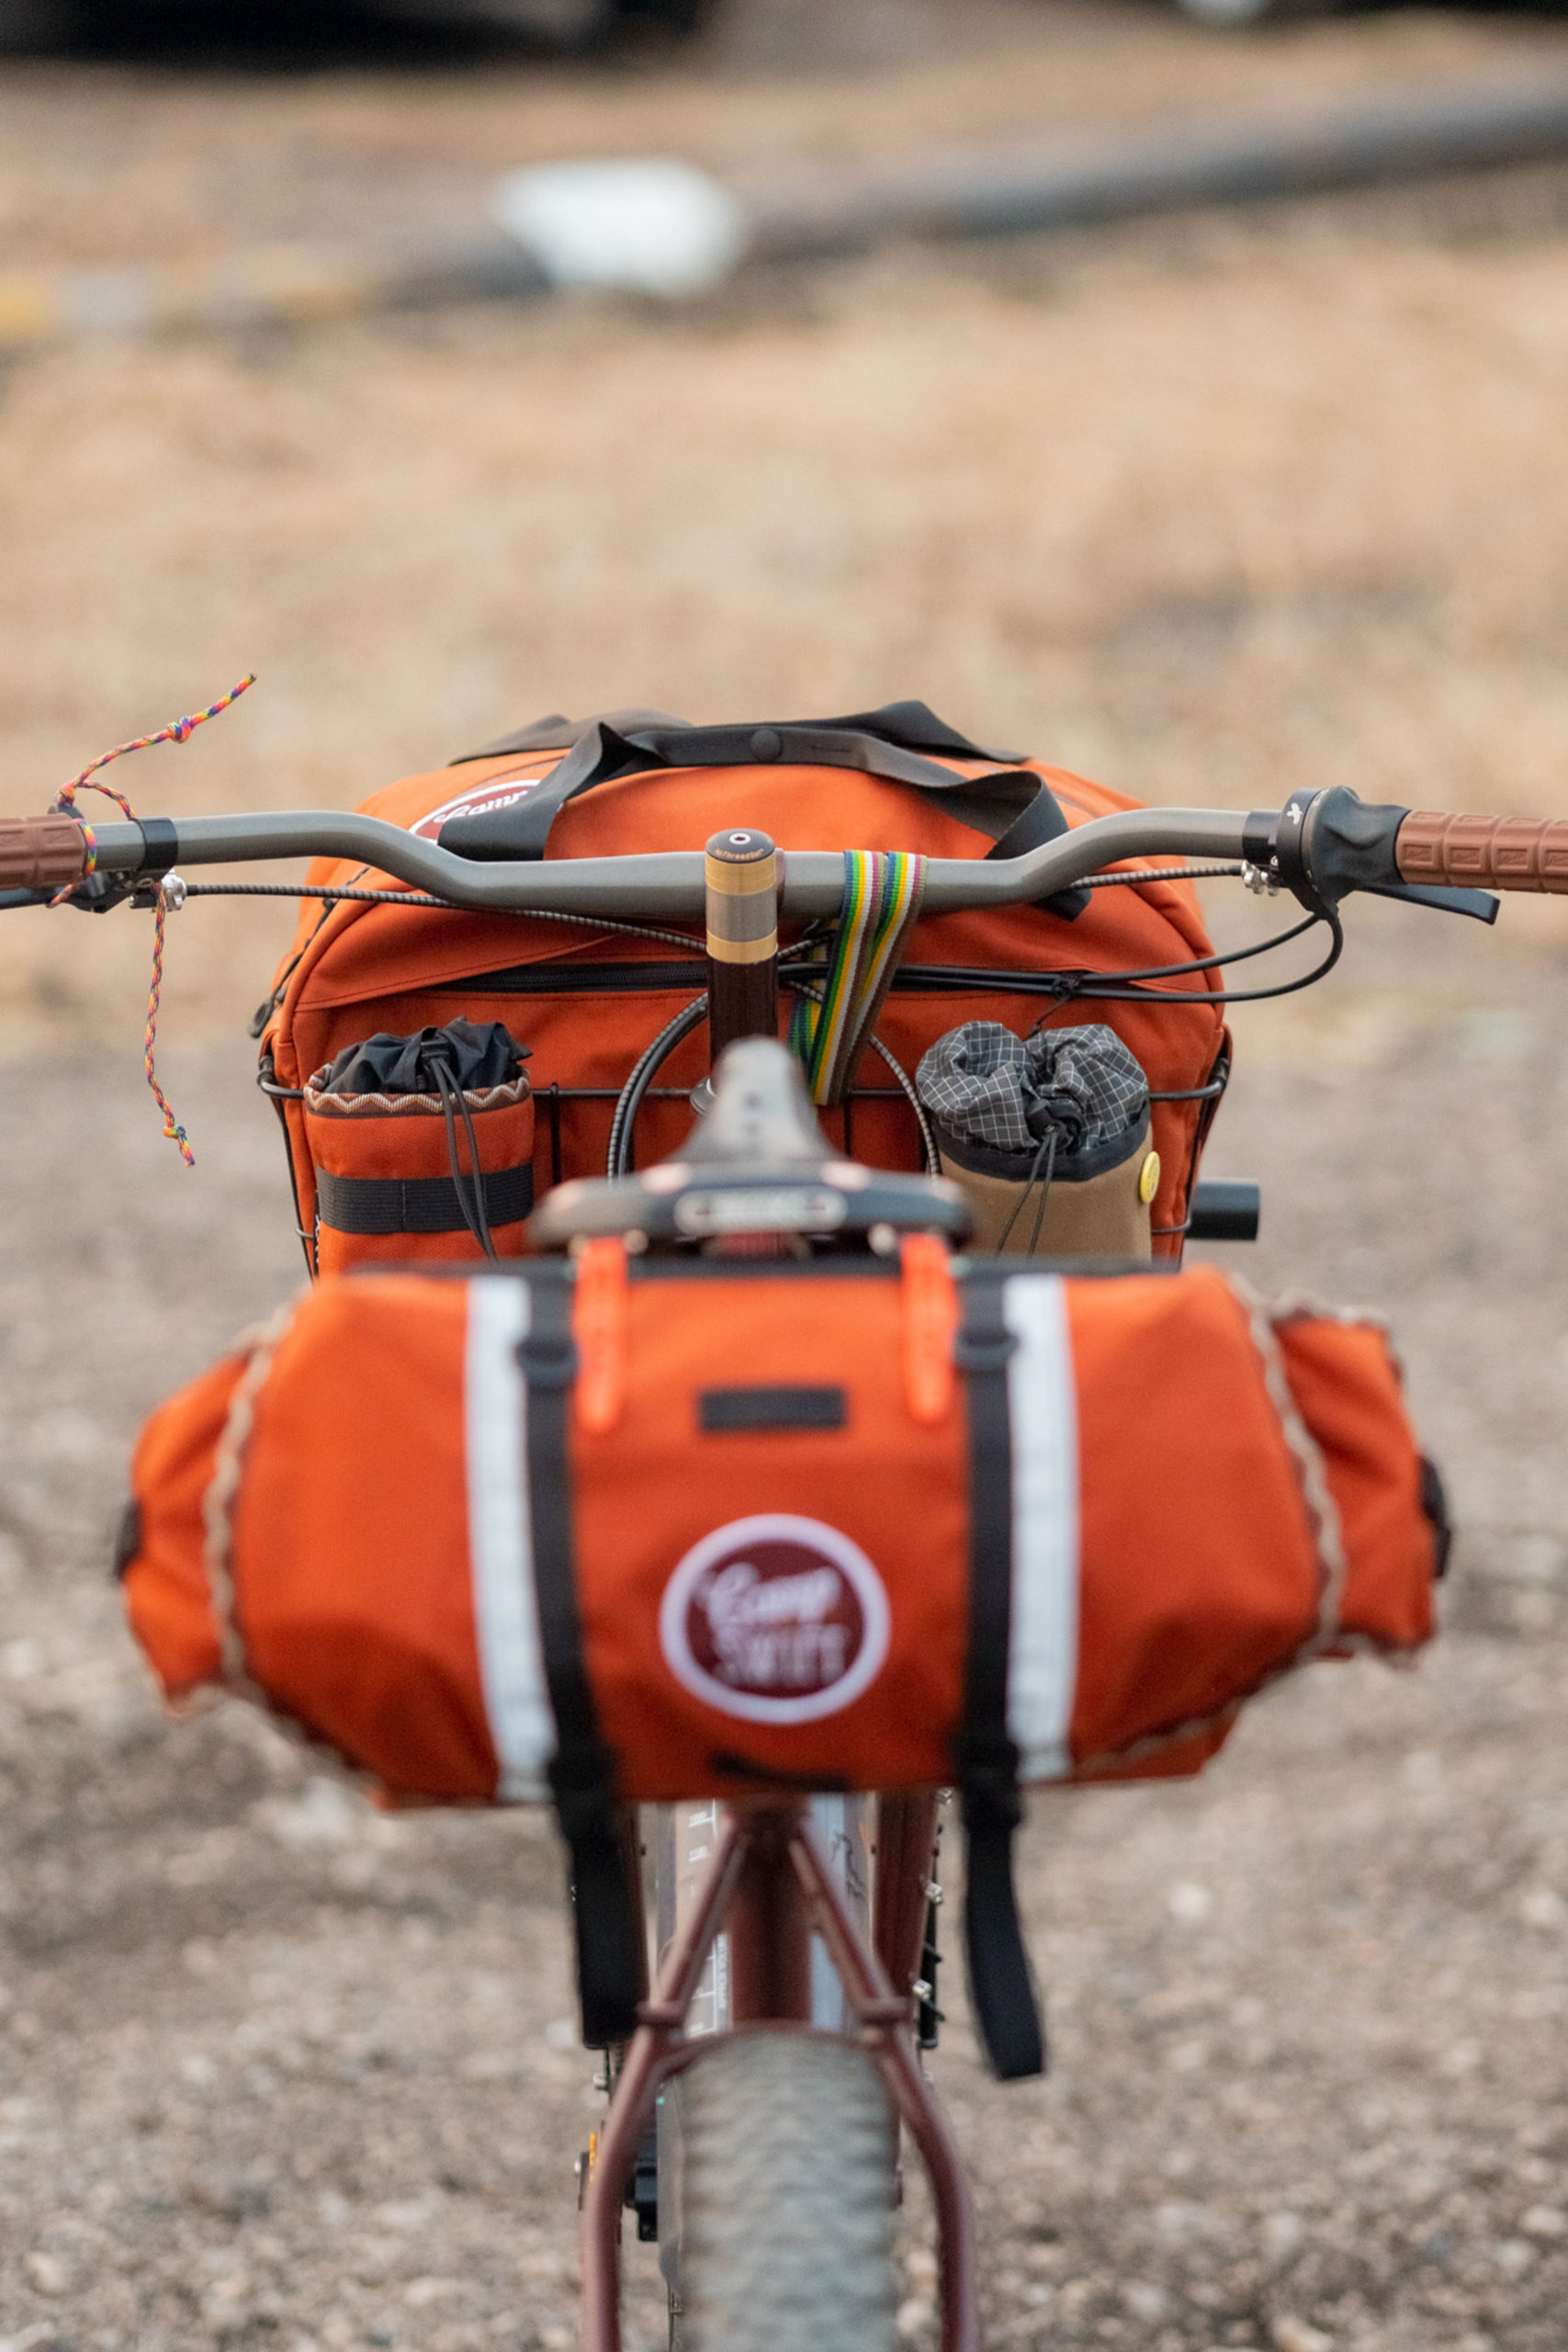 Camp and Go Slow × Swift Industries Collab - BIKEPACKING.com